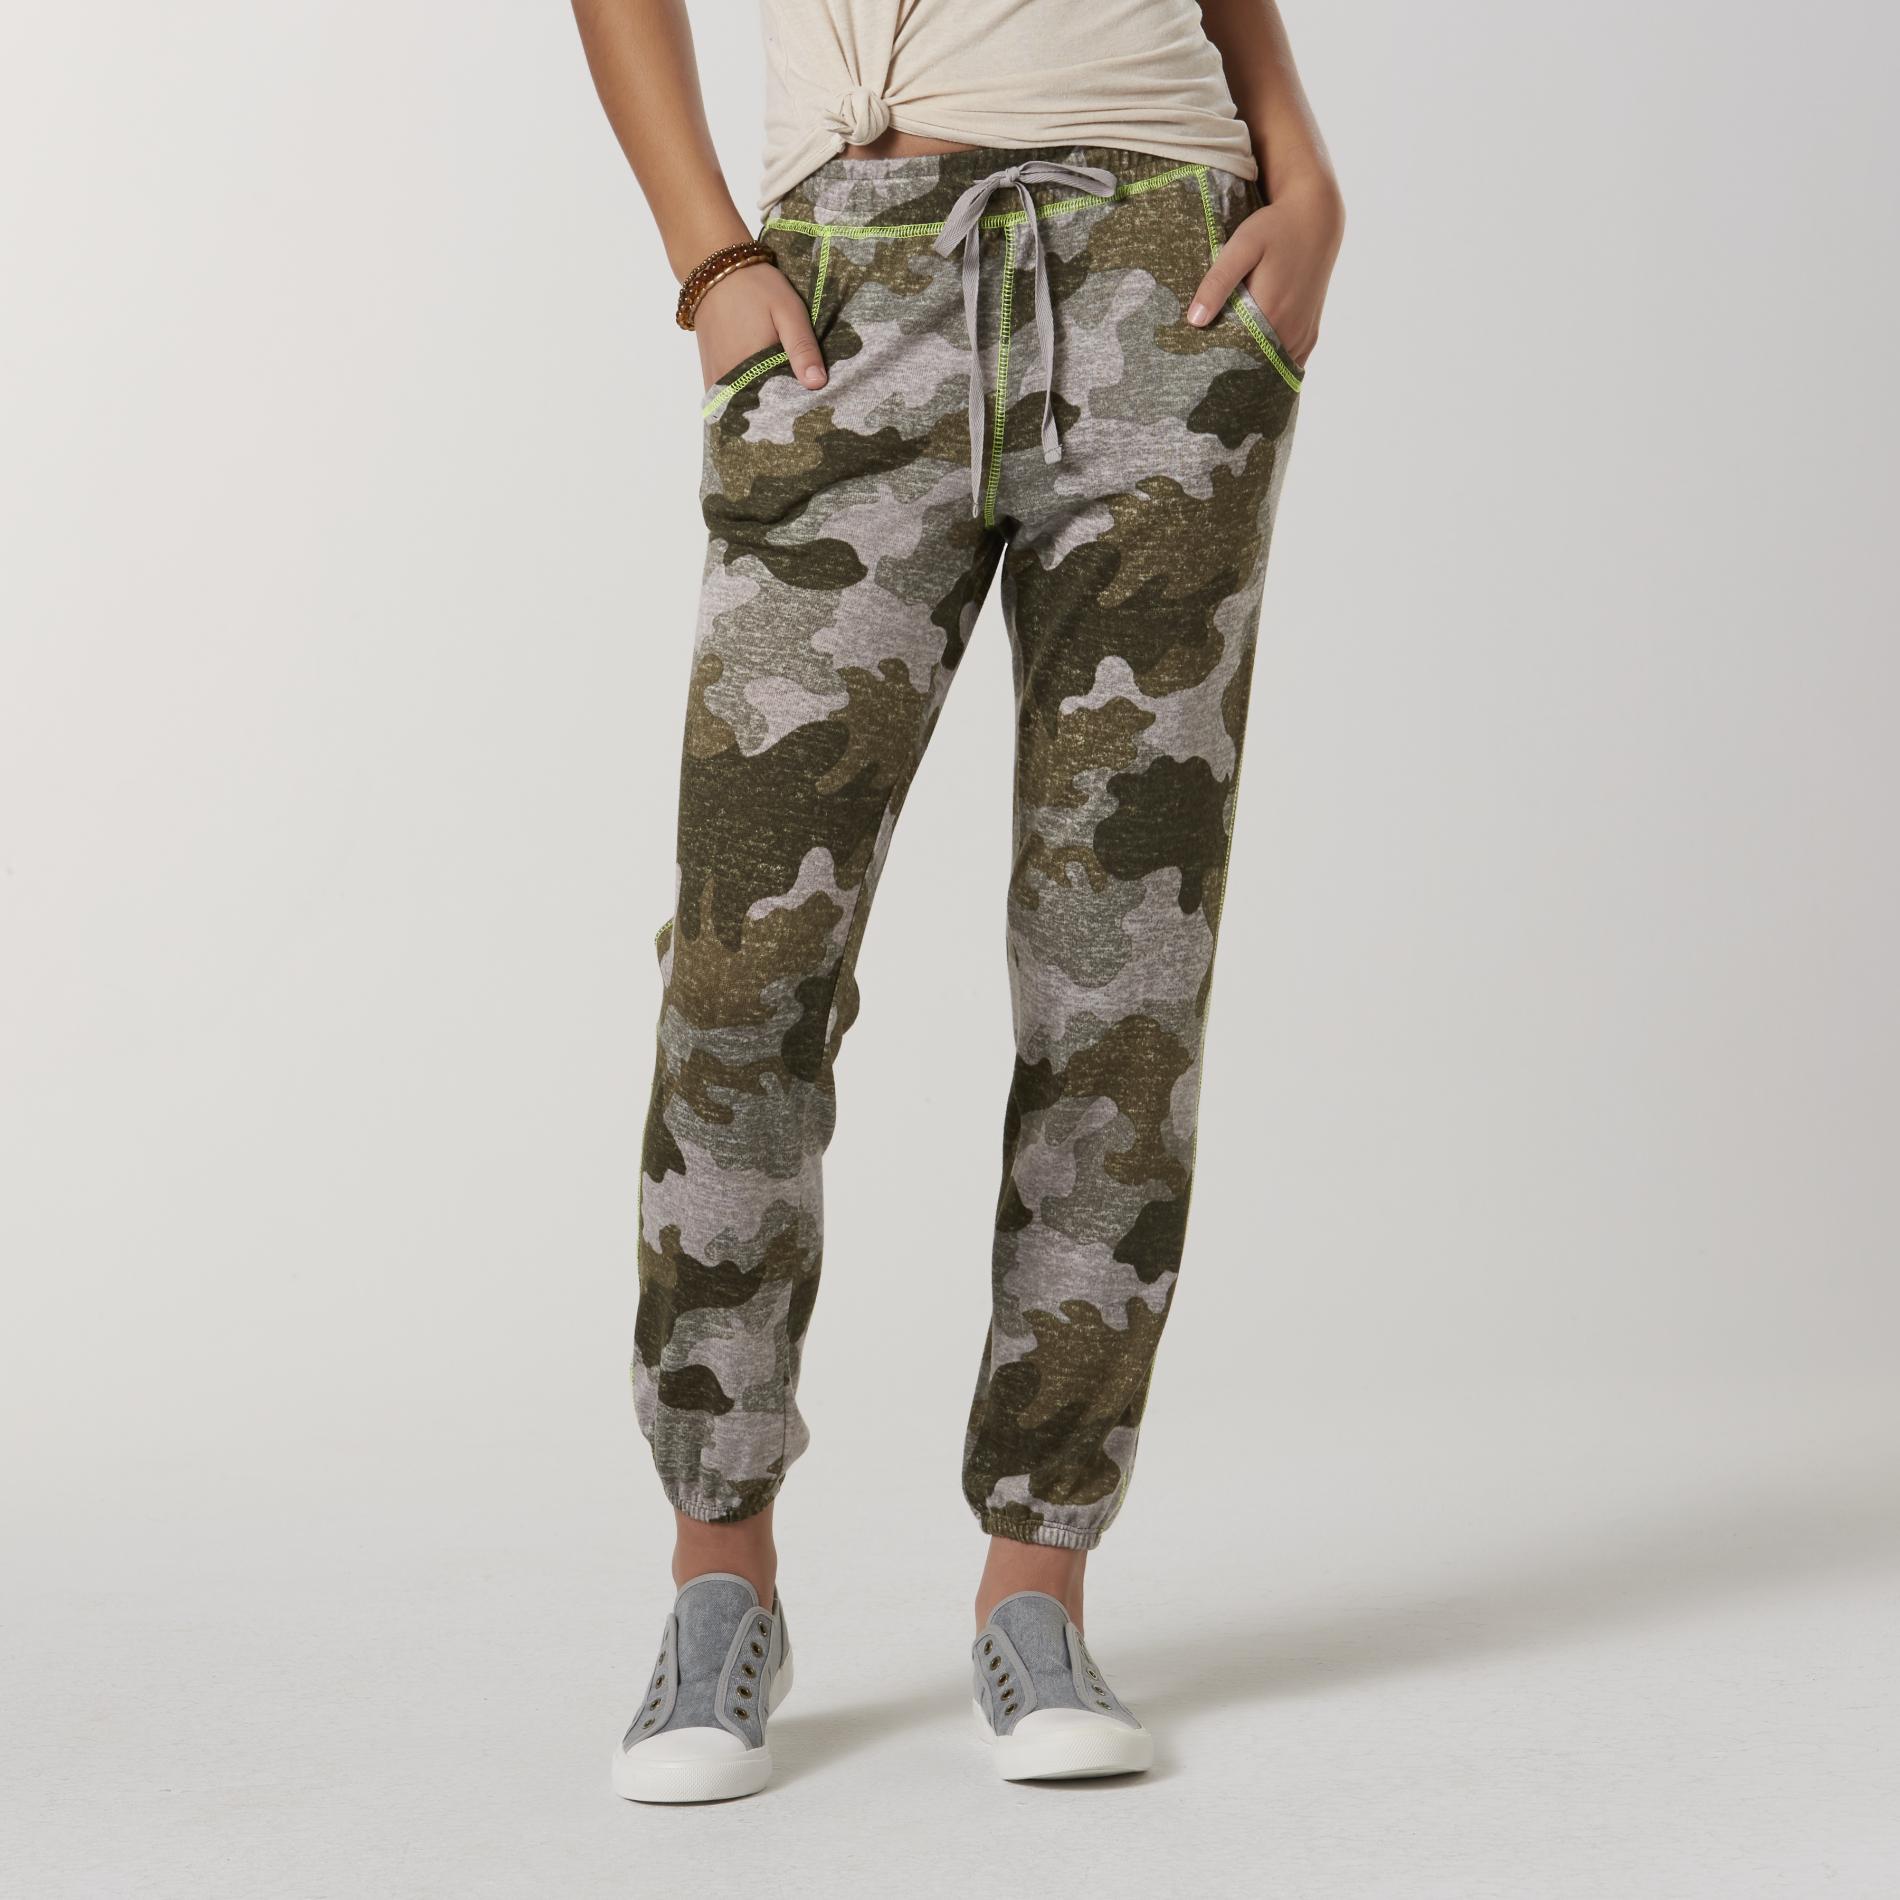 jogger pants camouflage